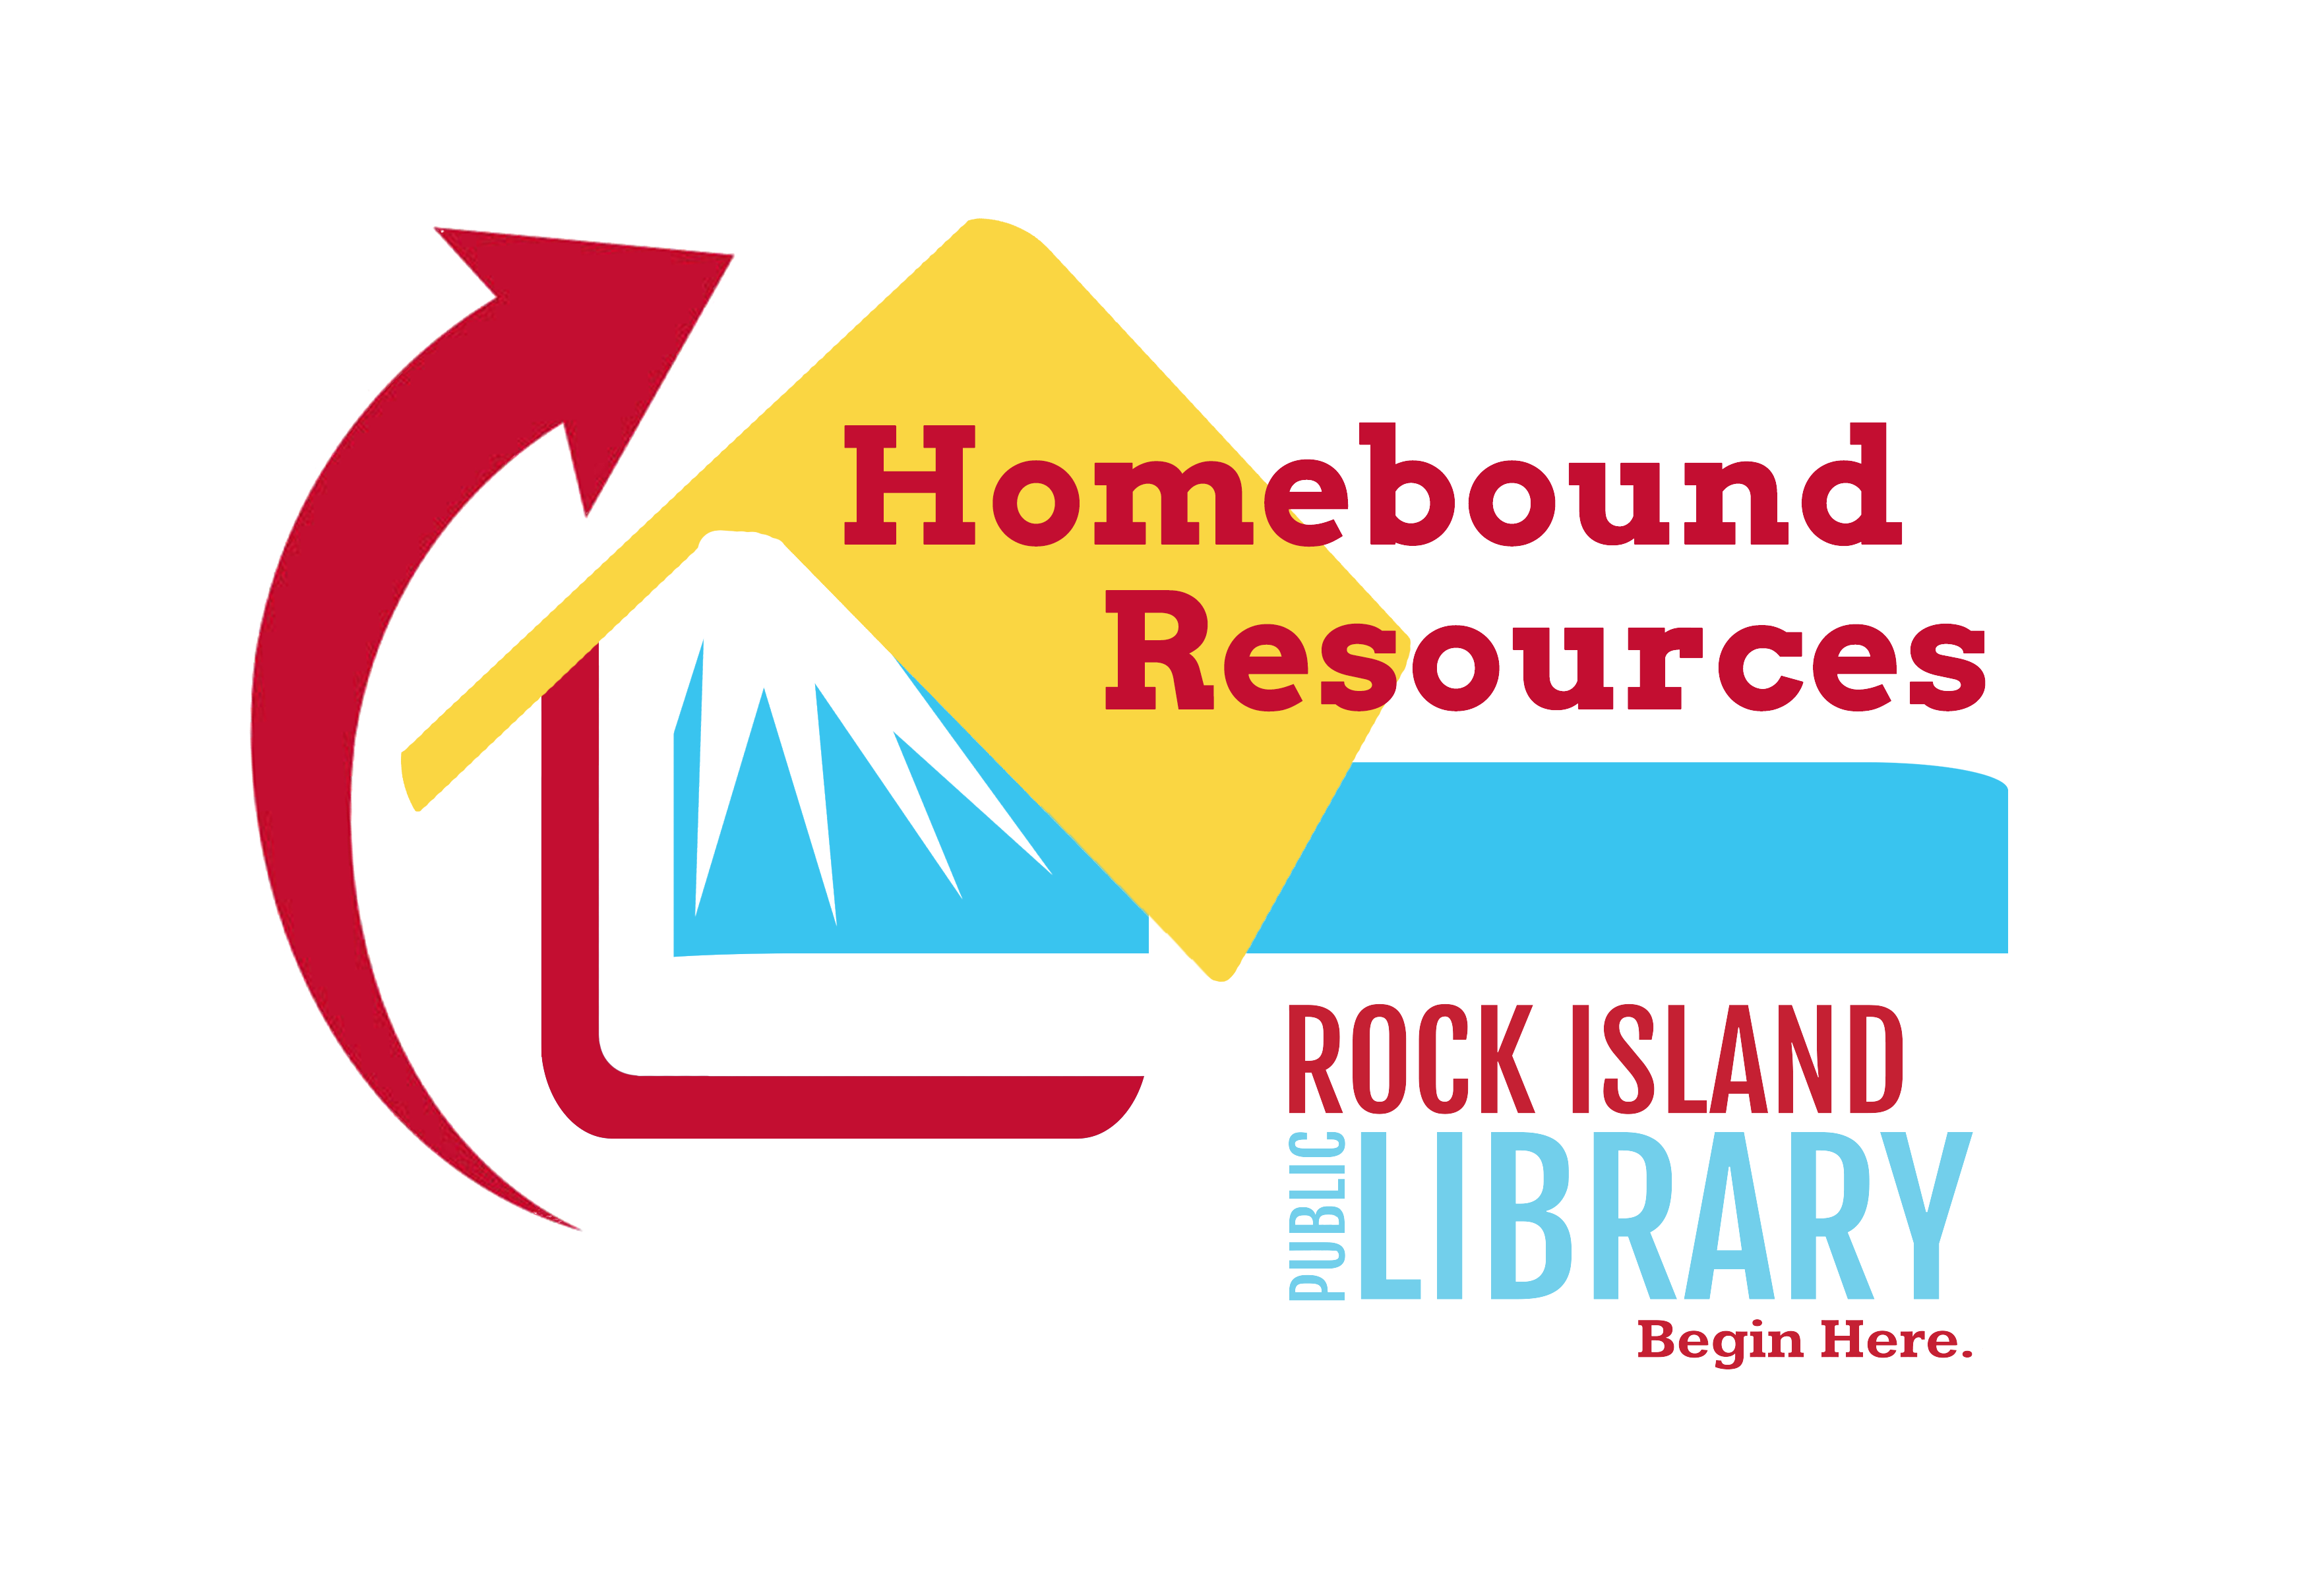 Homebound Resources from Rock Island Public Library logo